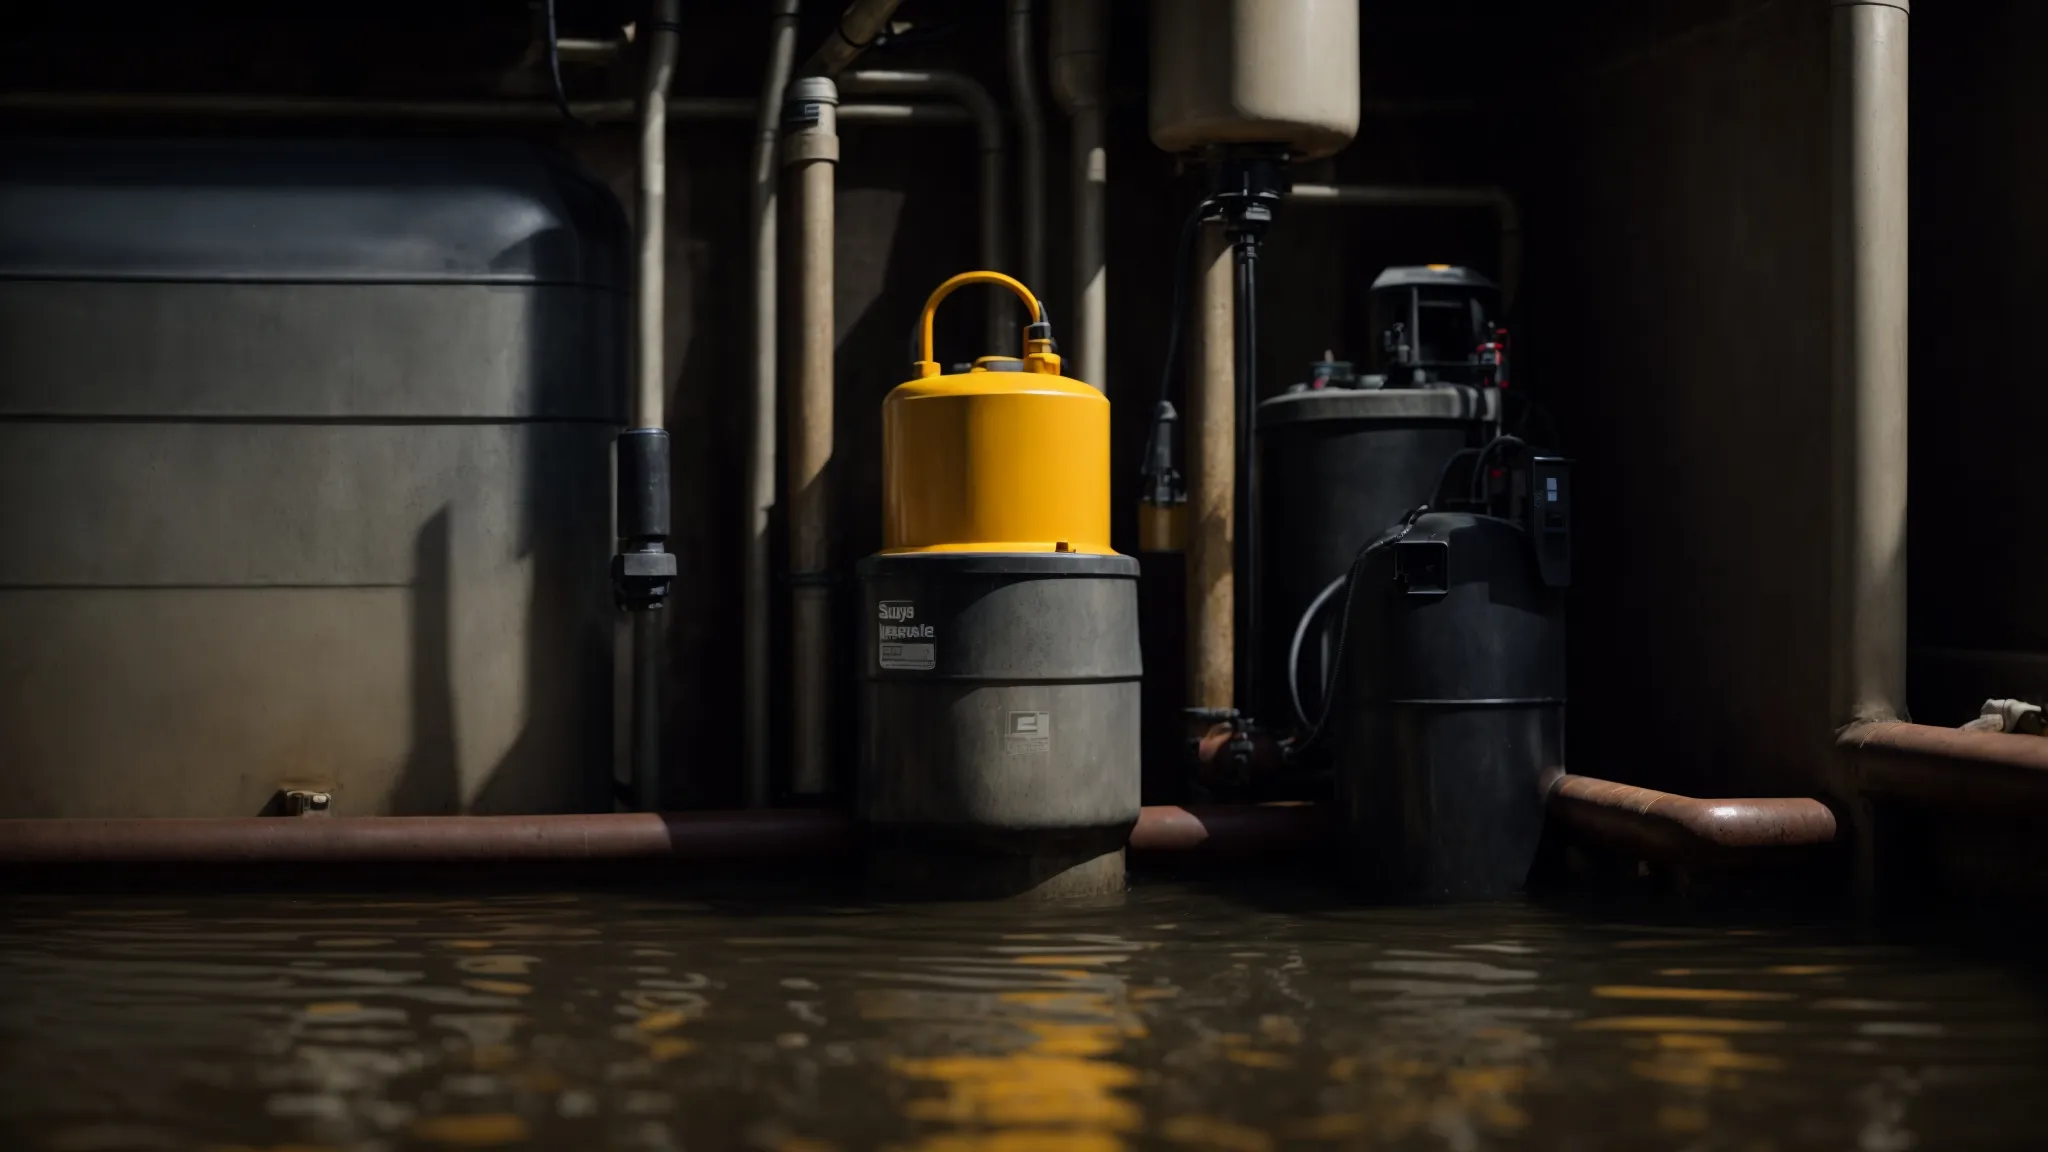 a sturdy sump pump with a robust battery backup sits ready in a dry basement, awaiting its duty to protect against potential flooding.